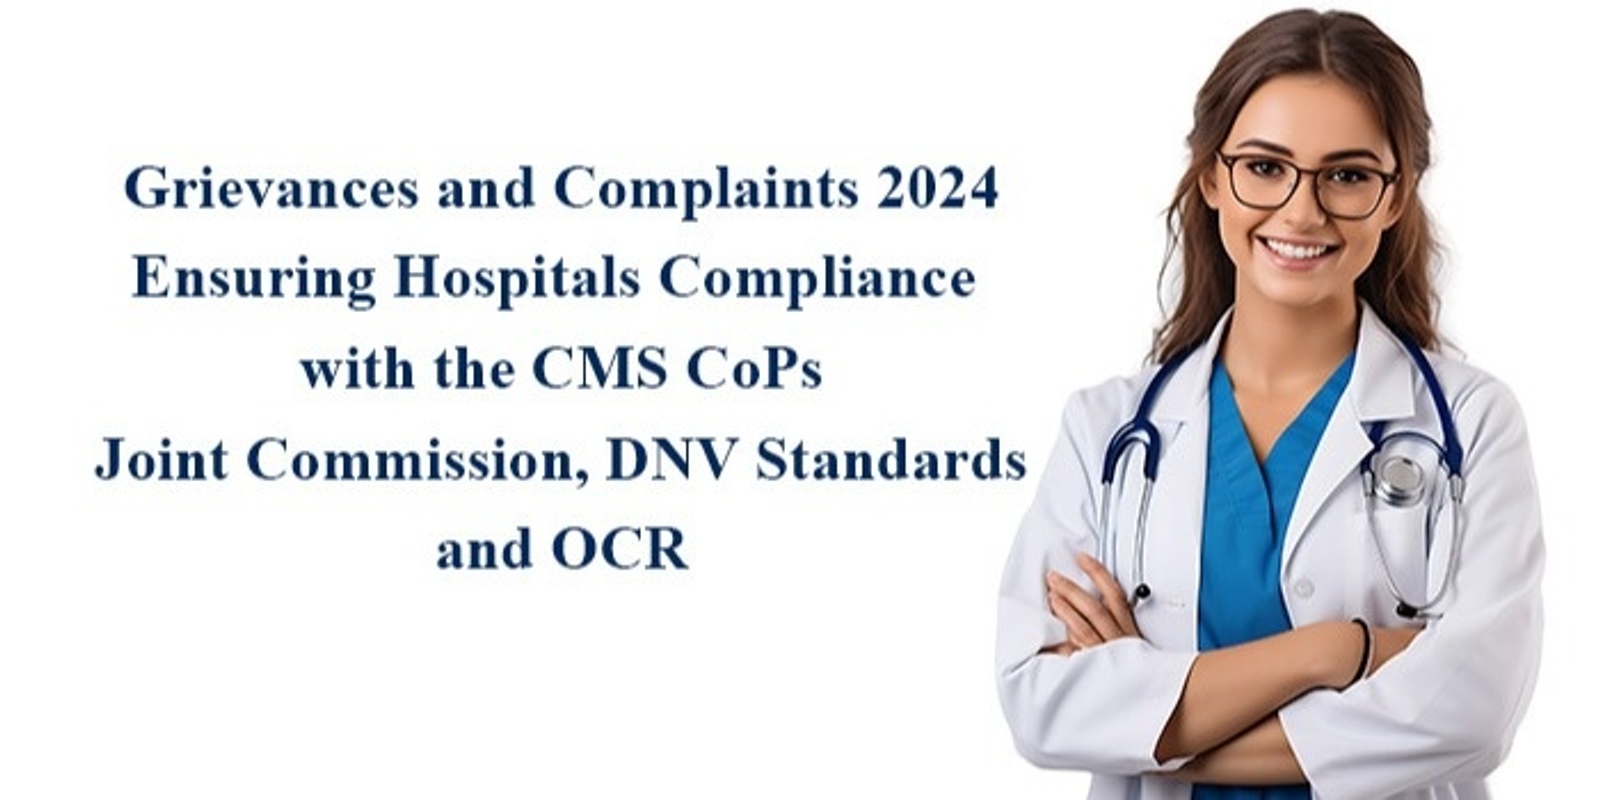 Grievances and Complaints 2024 Ensuring Hospitals Compliance with the